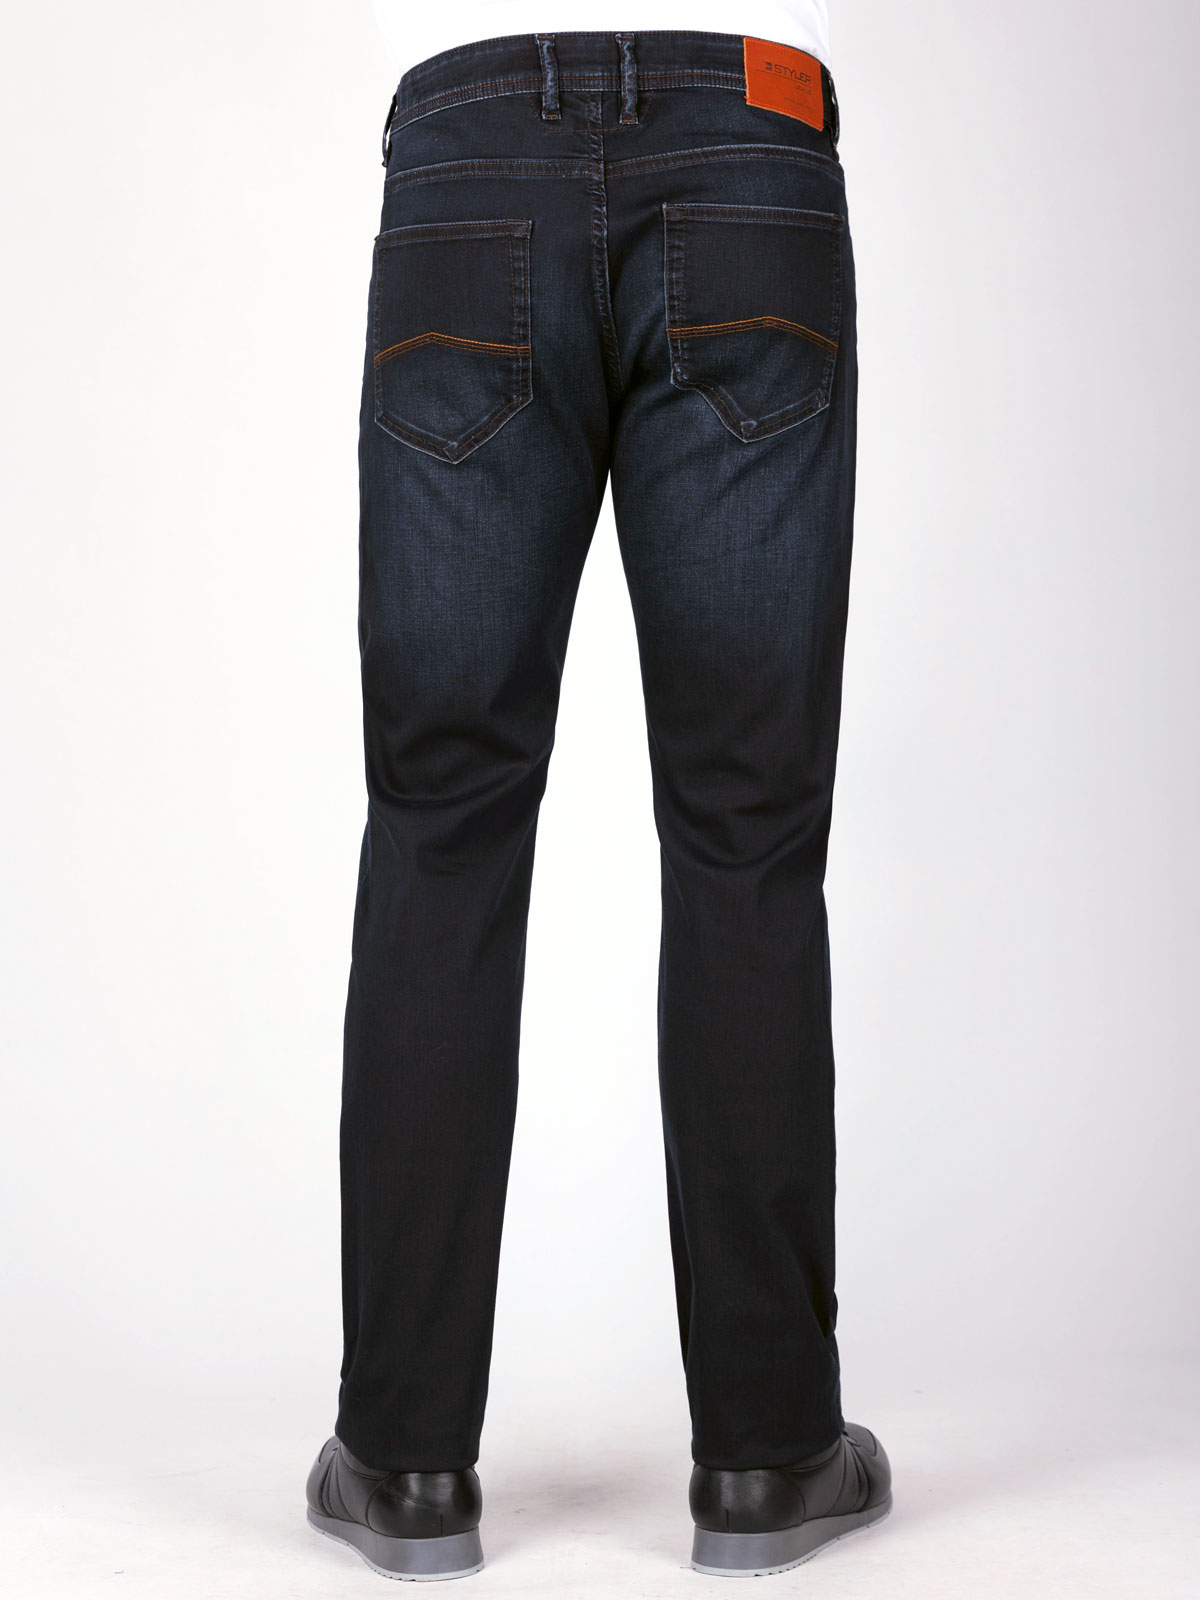 Mens jeans in blue - 62167 € 61.30 img3